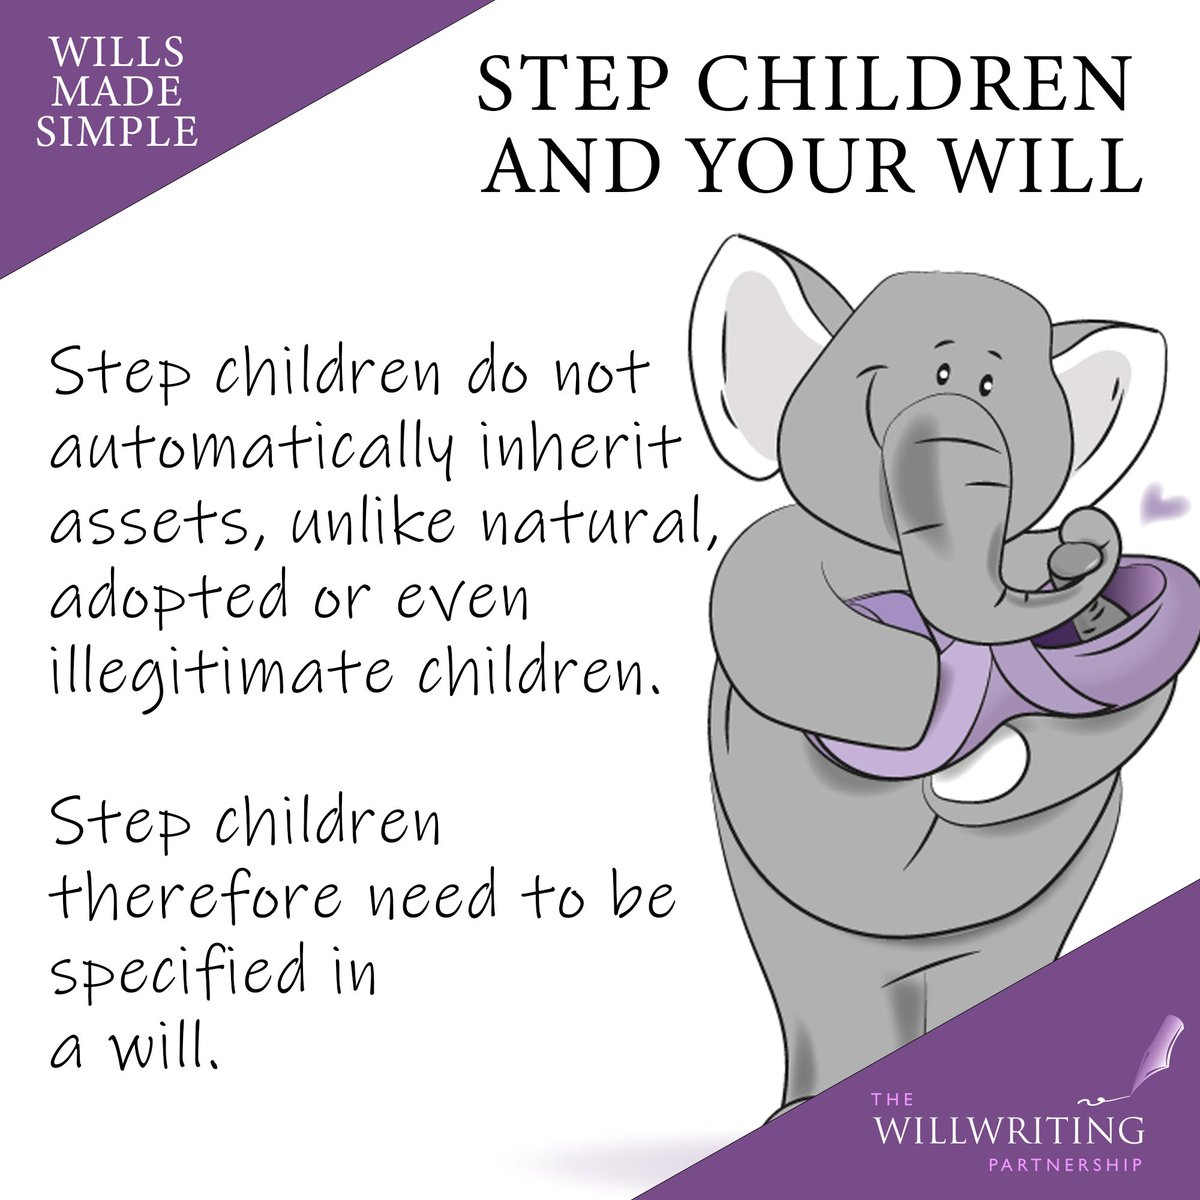 If you have a blended family you need to get your wills up to date.

twp.co.uk

#TWP #WillWriting #EstatePlanning #Willwritingbutfriendlier #WillsMadeSimple #EstatePlanning101